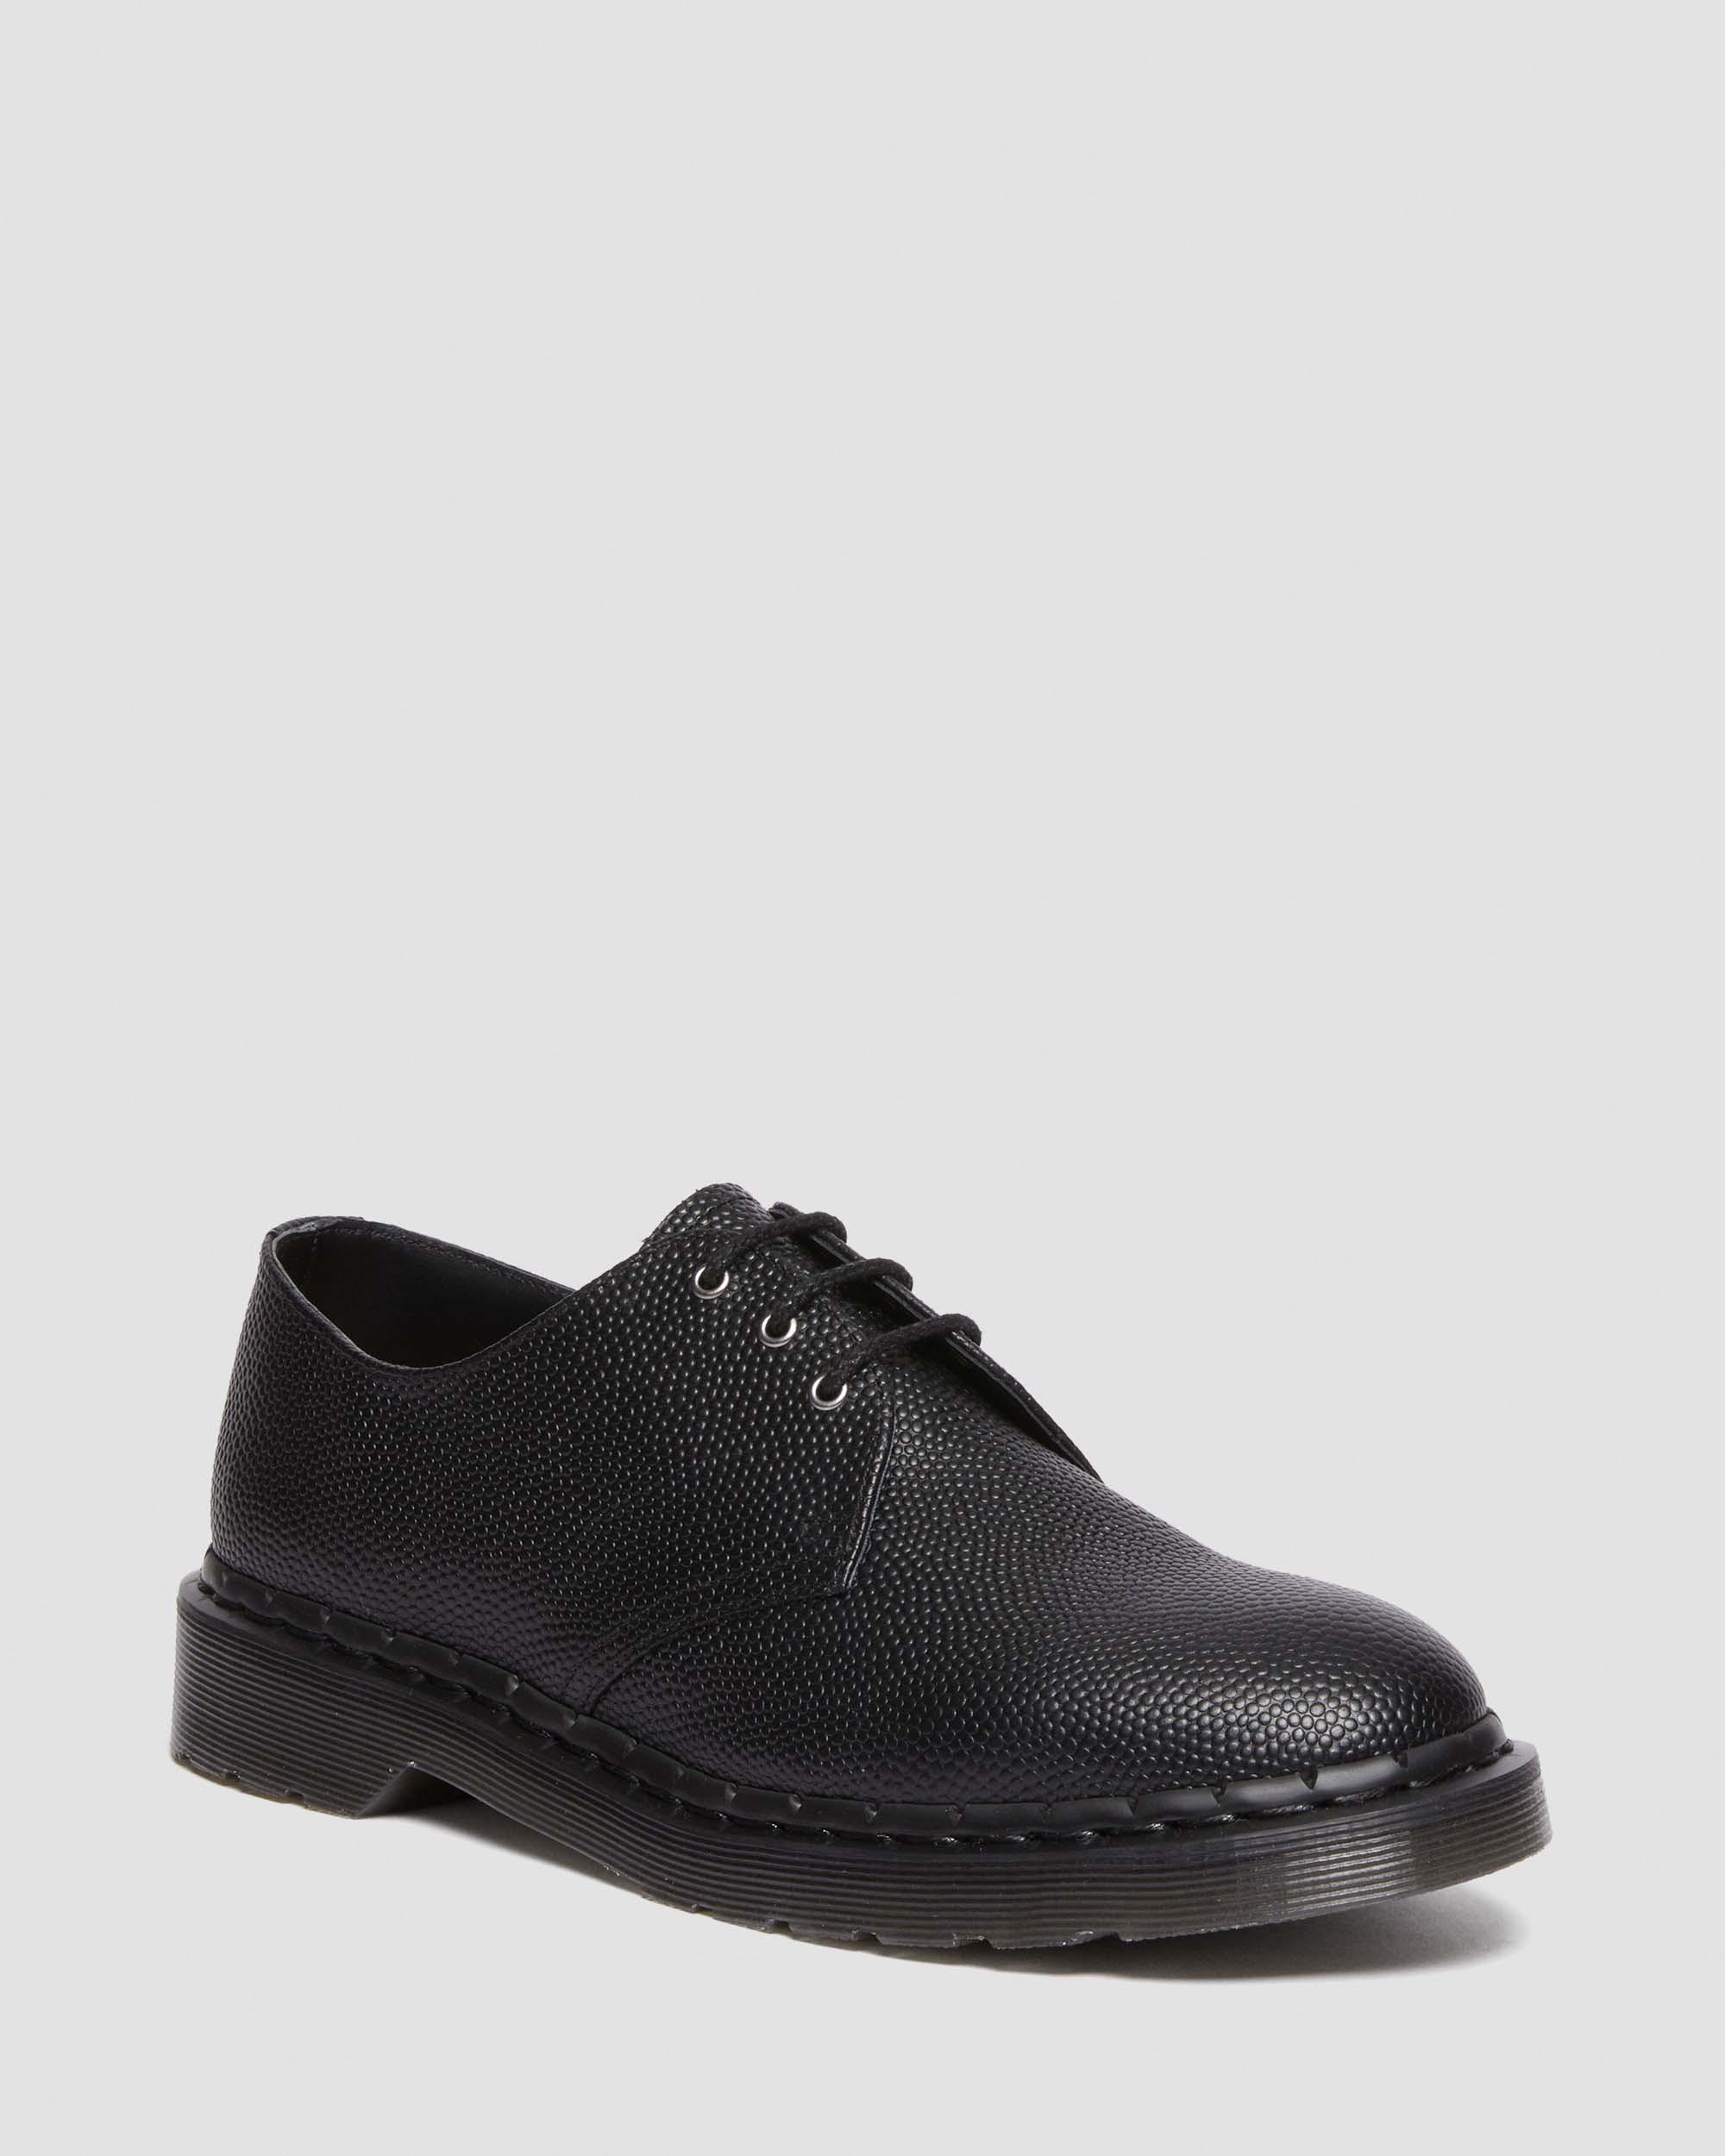 1461 Pebble Grain Leather Oxford Shoes in Black | Dr. Martens